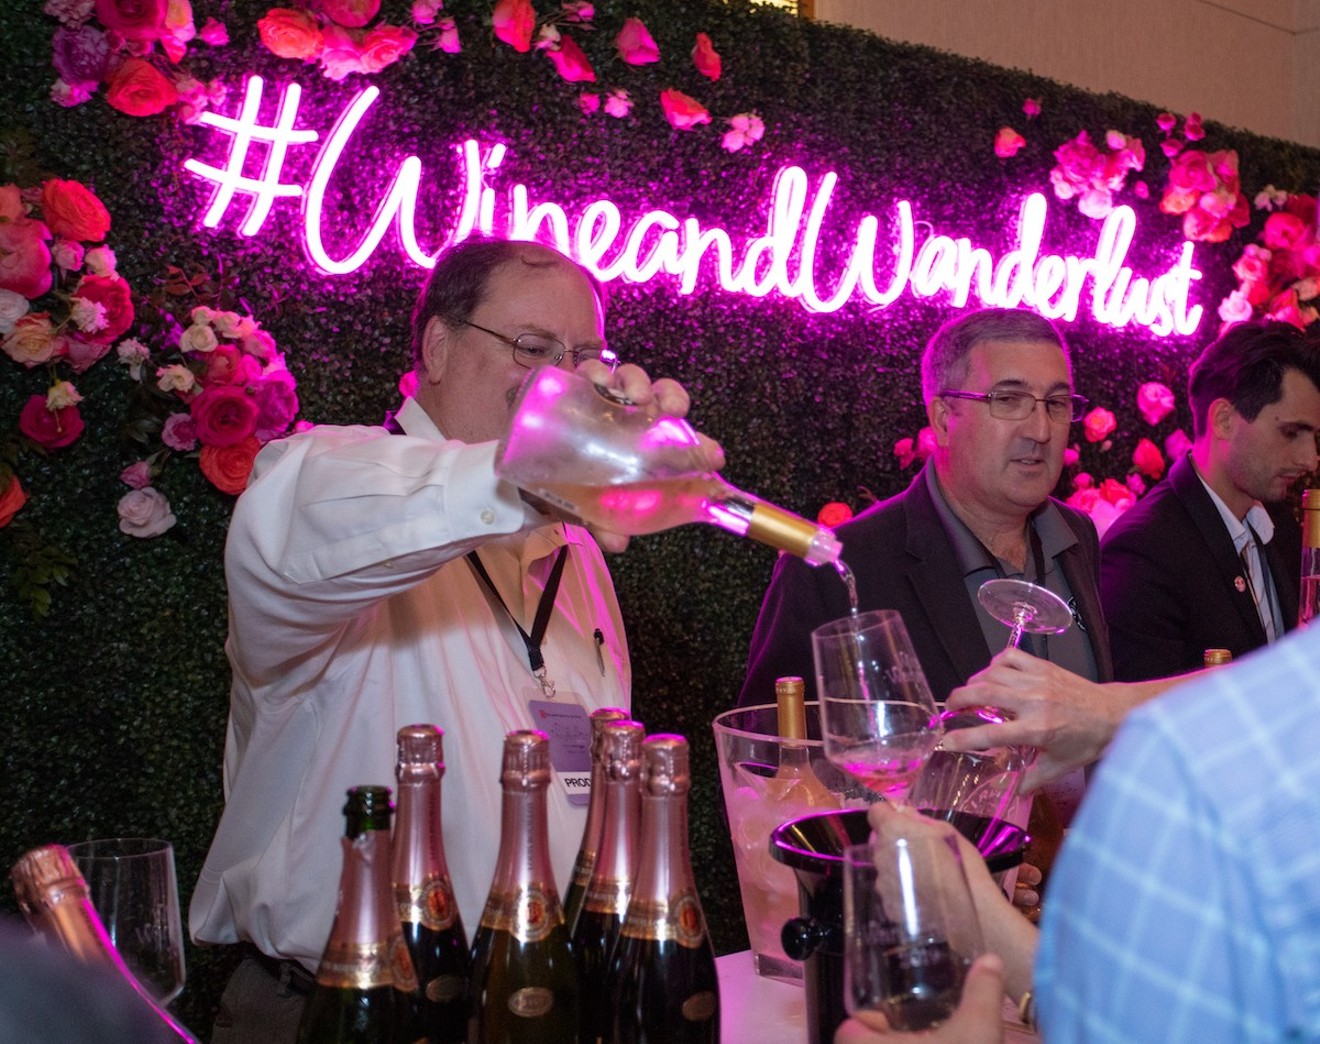 This month Total Wine brings its Wine & Wanderlust event to South Florida.